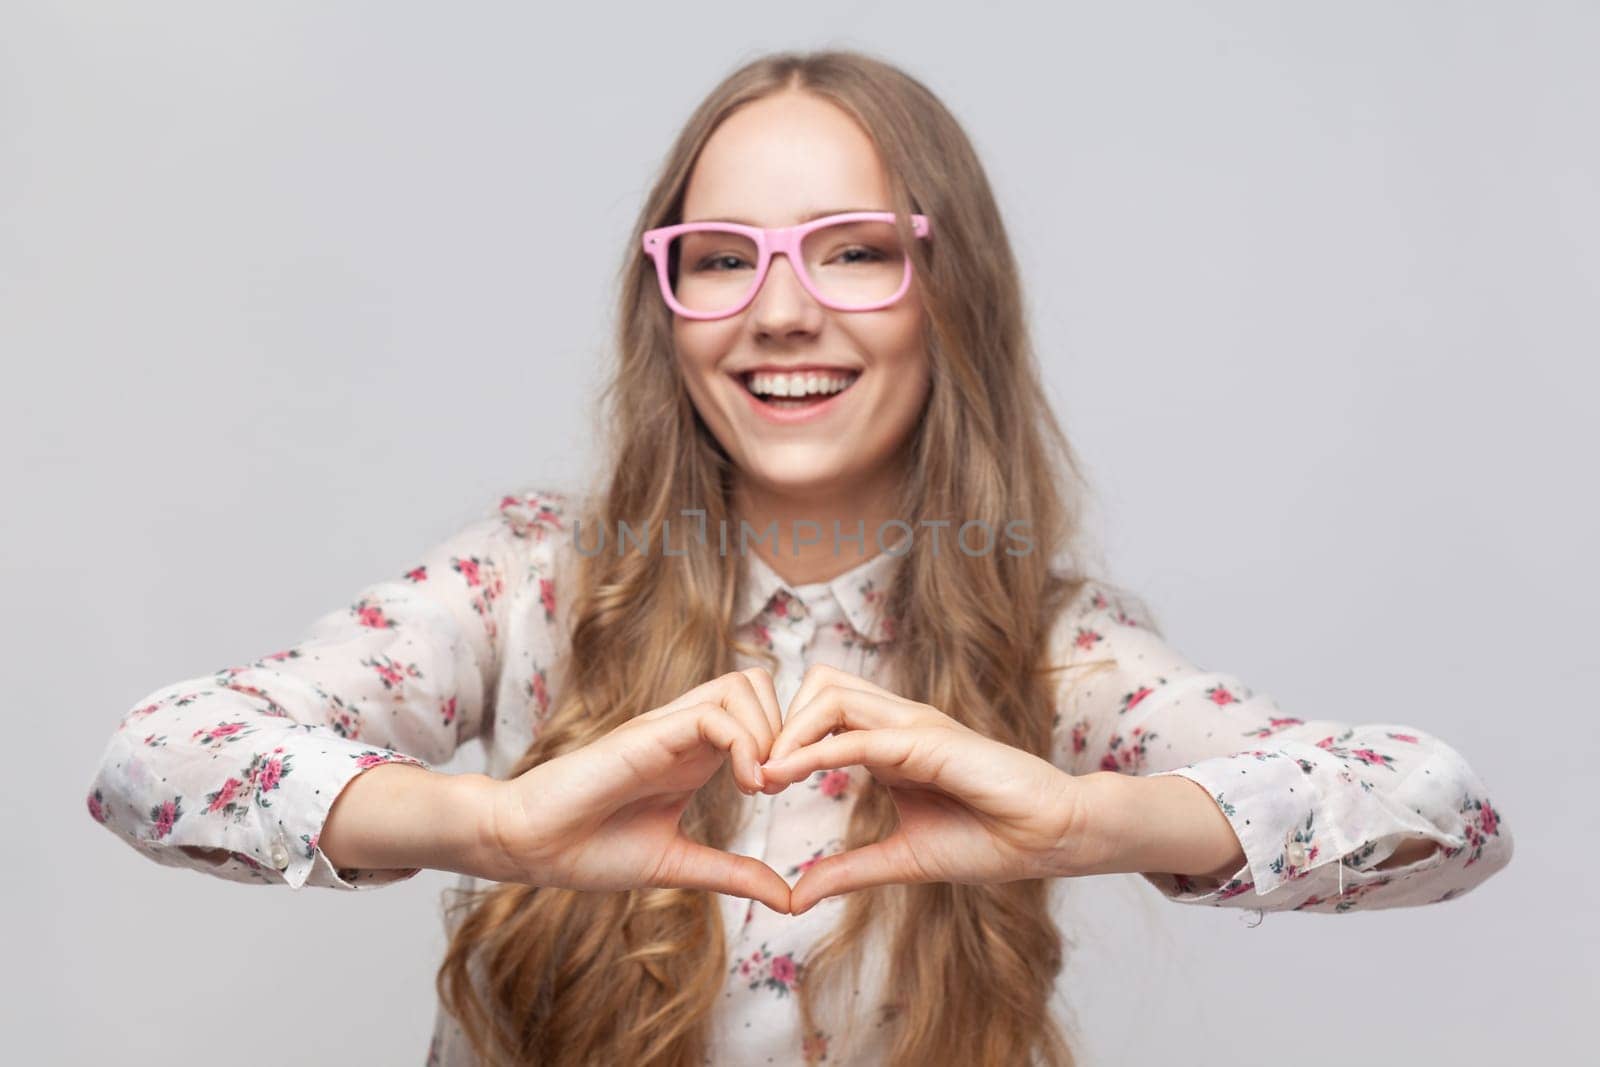 Aattractive romantic woman with long blond hair standing making heart with hands, smiling playfully. by Khosro1